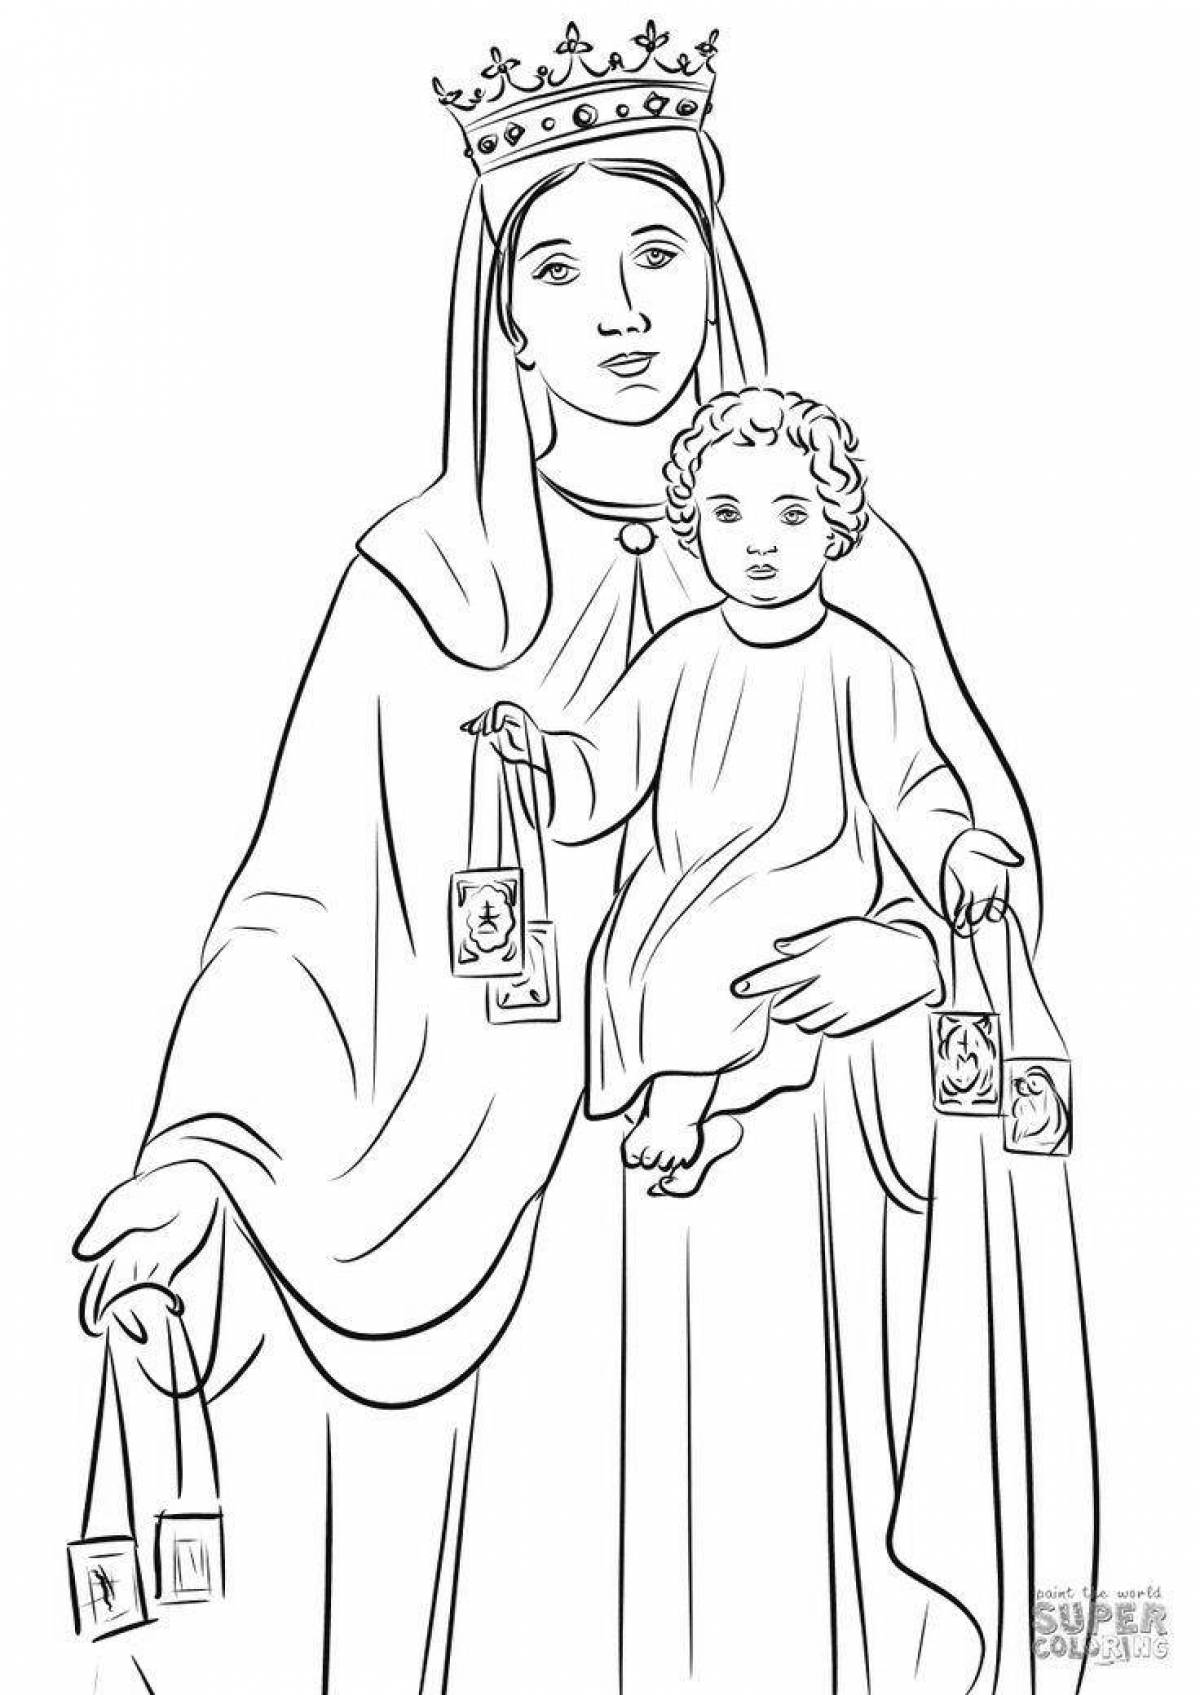 Charming coloring of the Virgin Mary